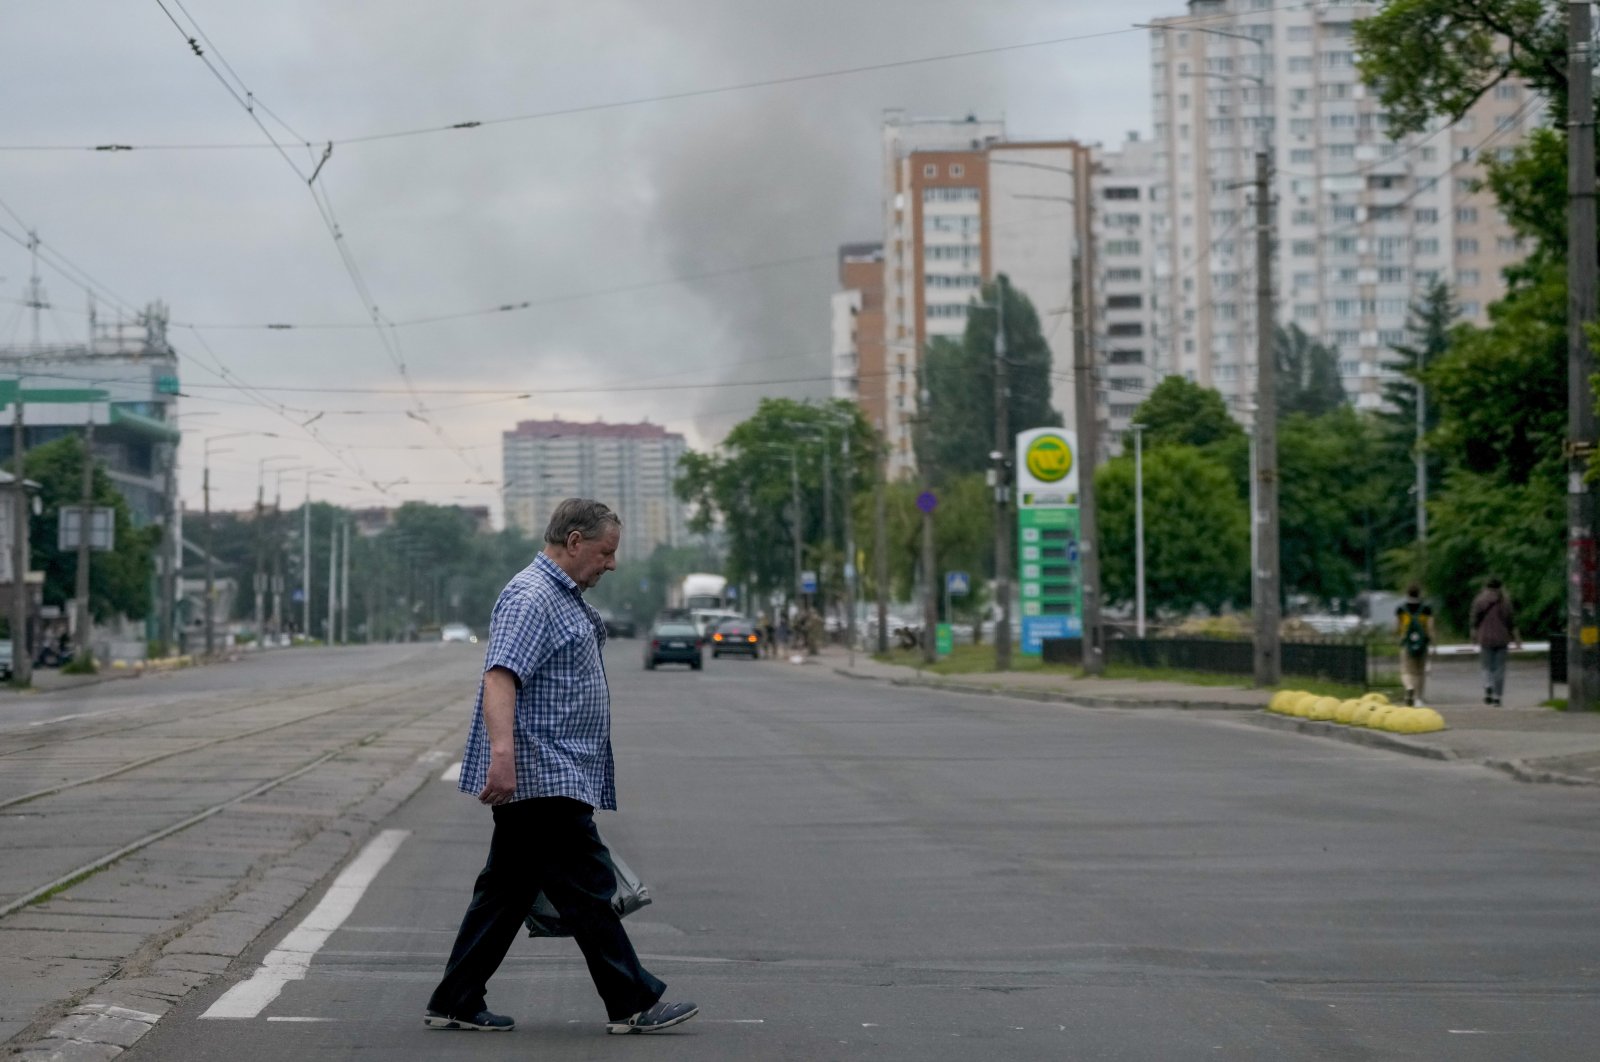 A man crosses a street as smoke rises in the background after Russian missile strikes in Kyiv, Ukraine, June 5, 2022. (AP Photo)